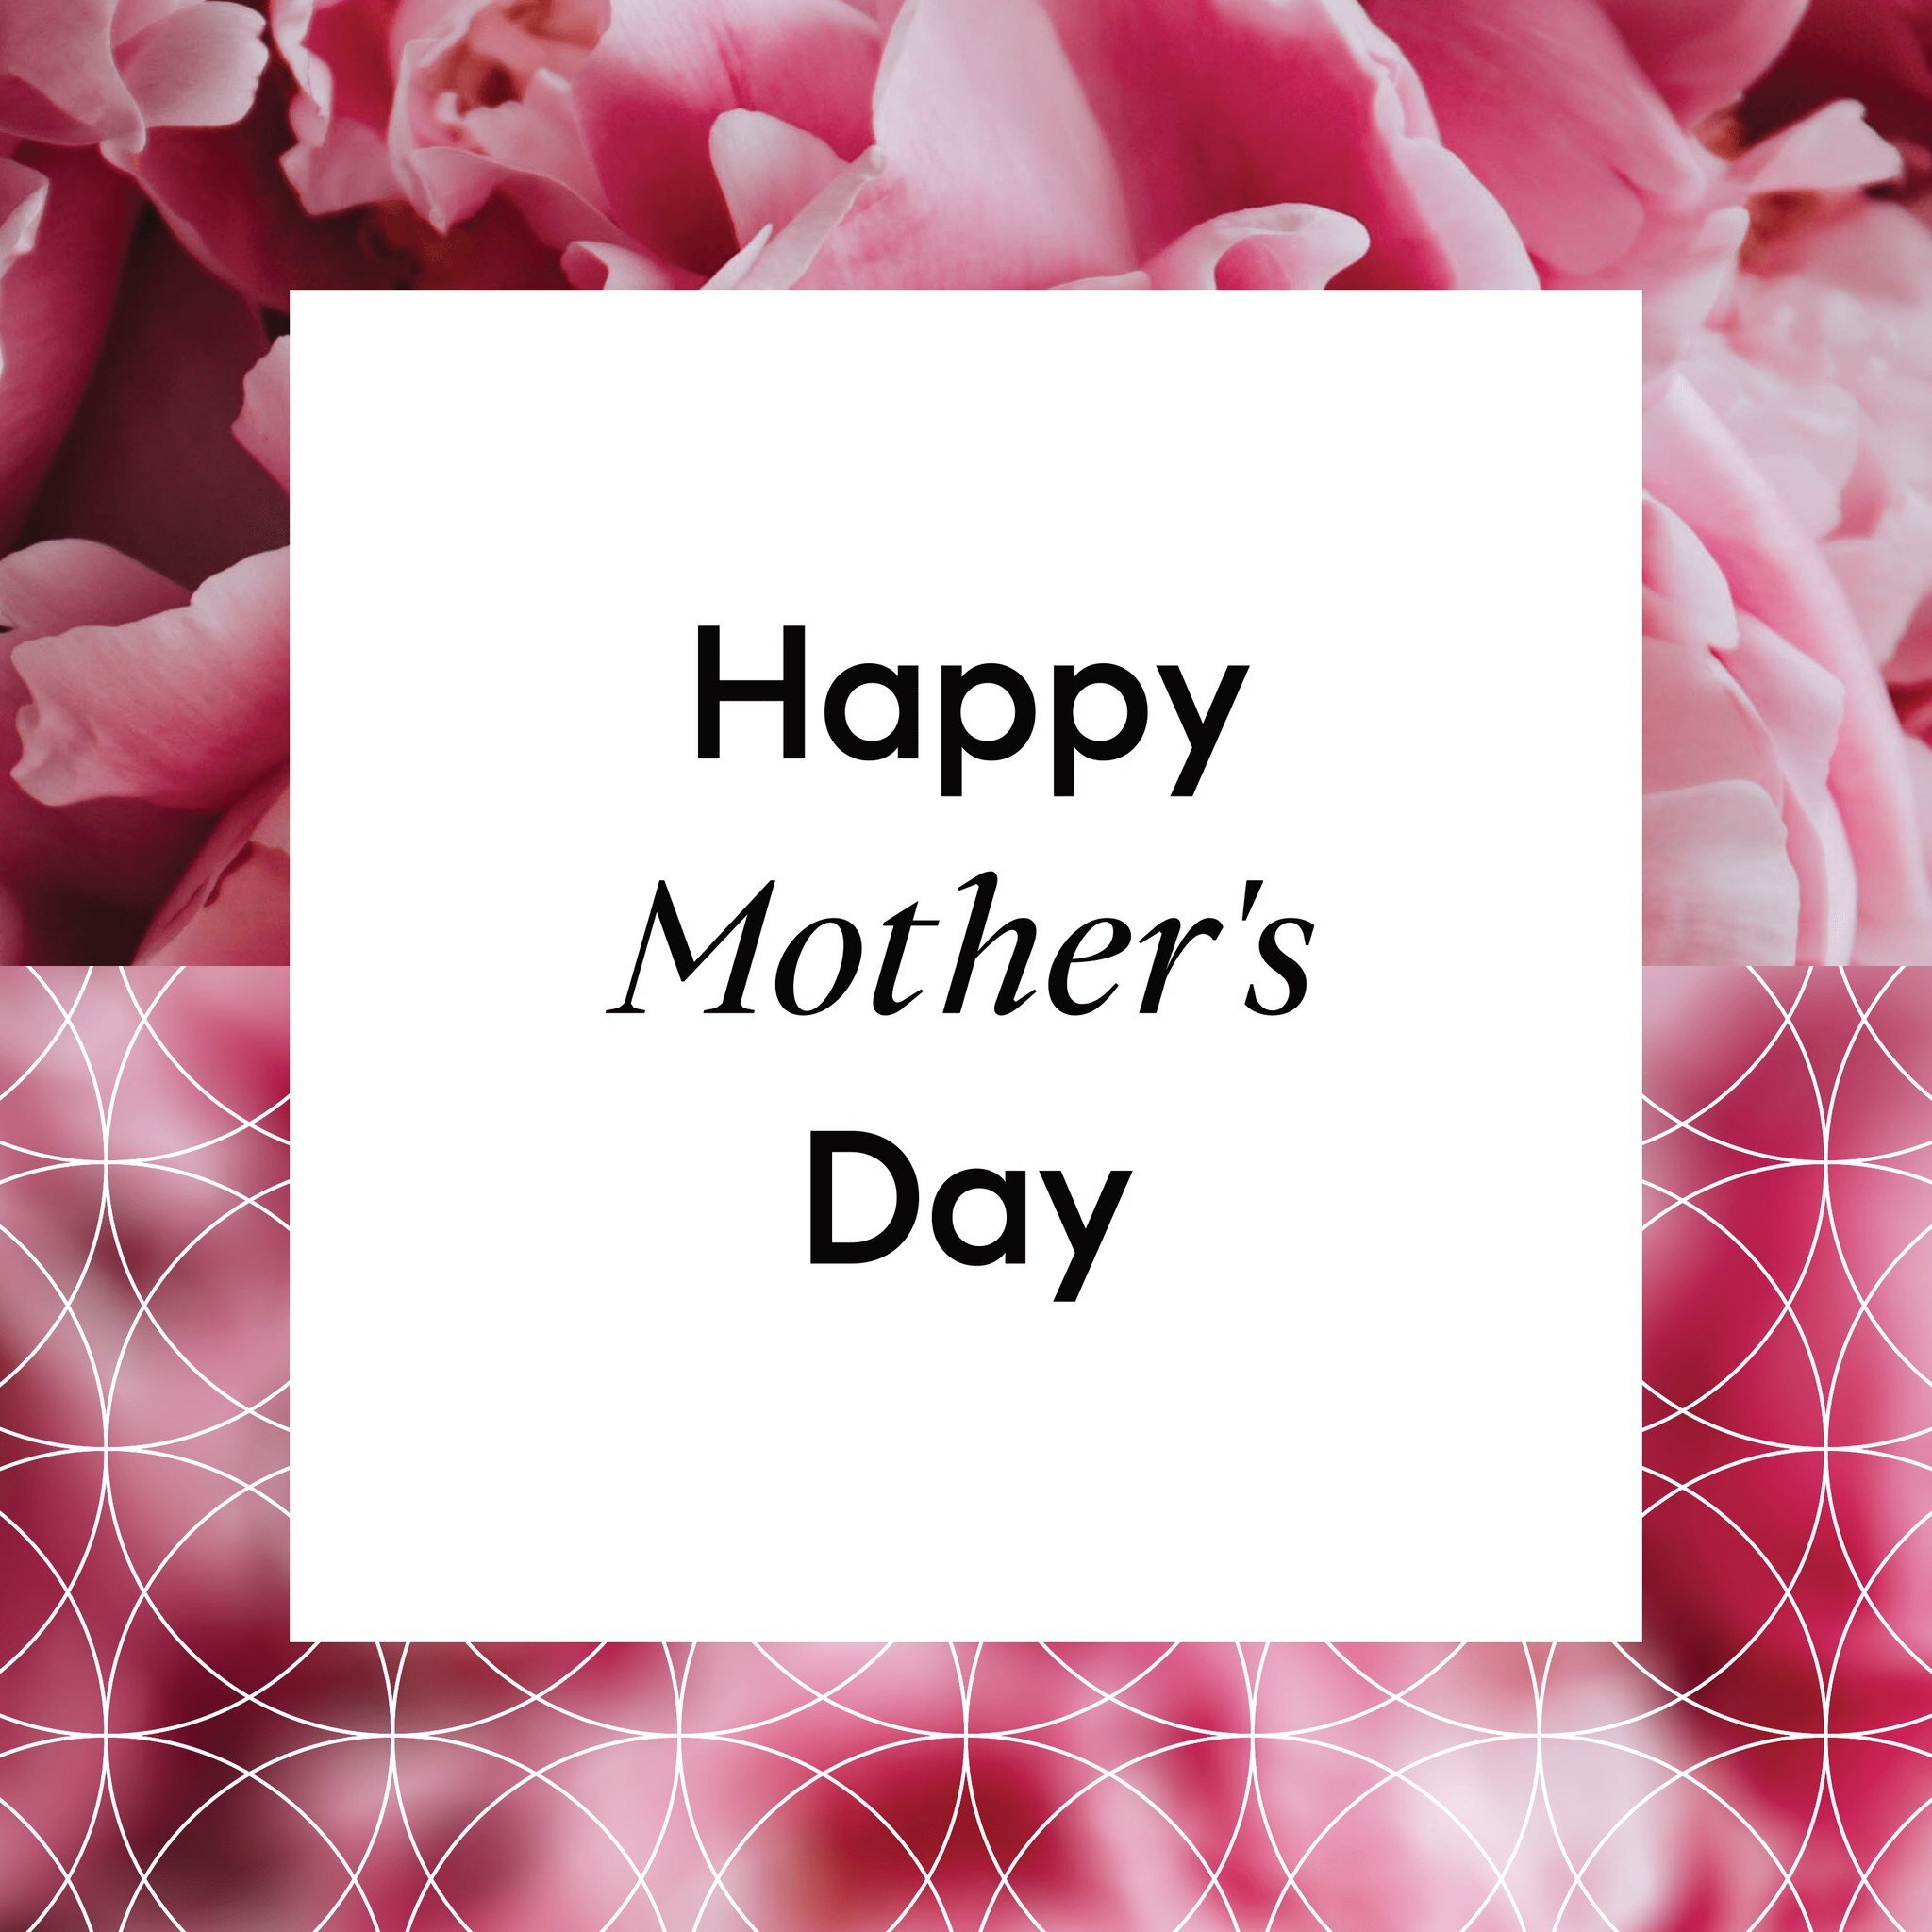 Whether near or far on this Mother&rsquo;s Day, we want to celebrate those who get the privilege to work alongside their very own. At Compass, here are a few words that the mothers who pull double duty as parents and real estate agents embody. Leave 